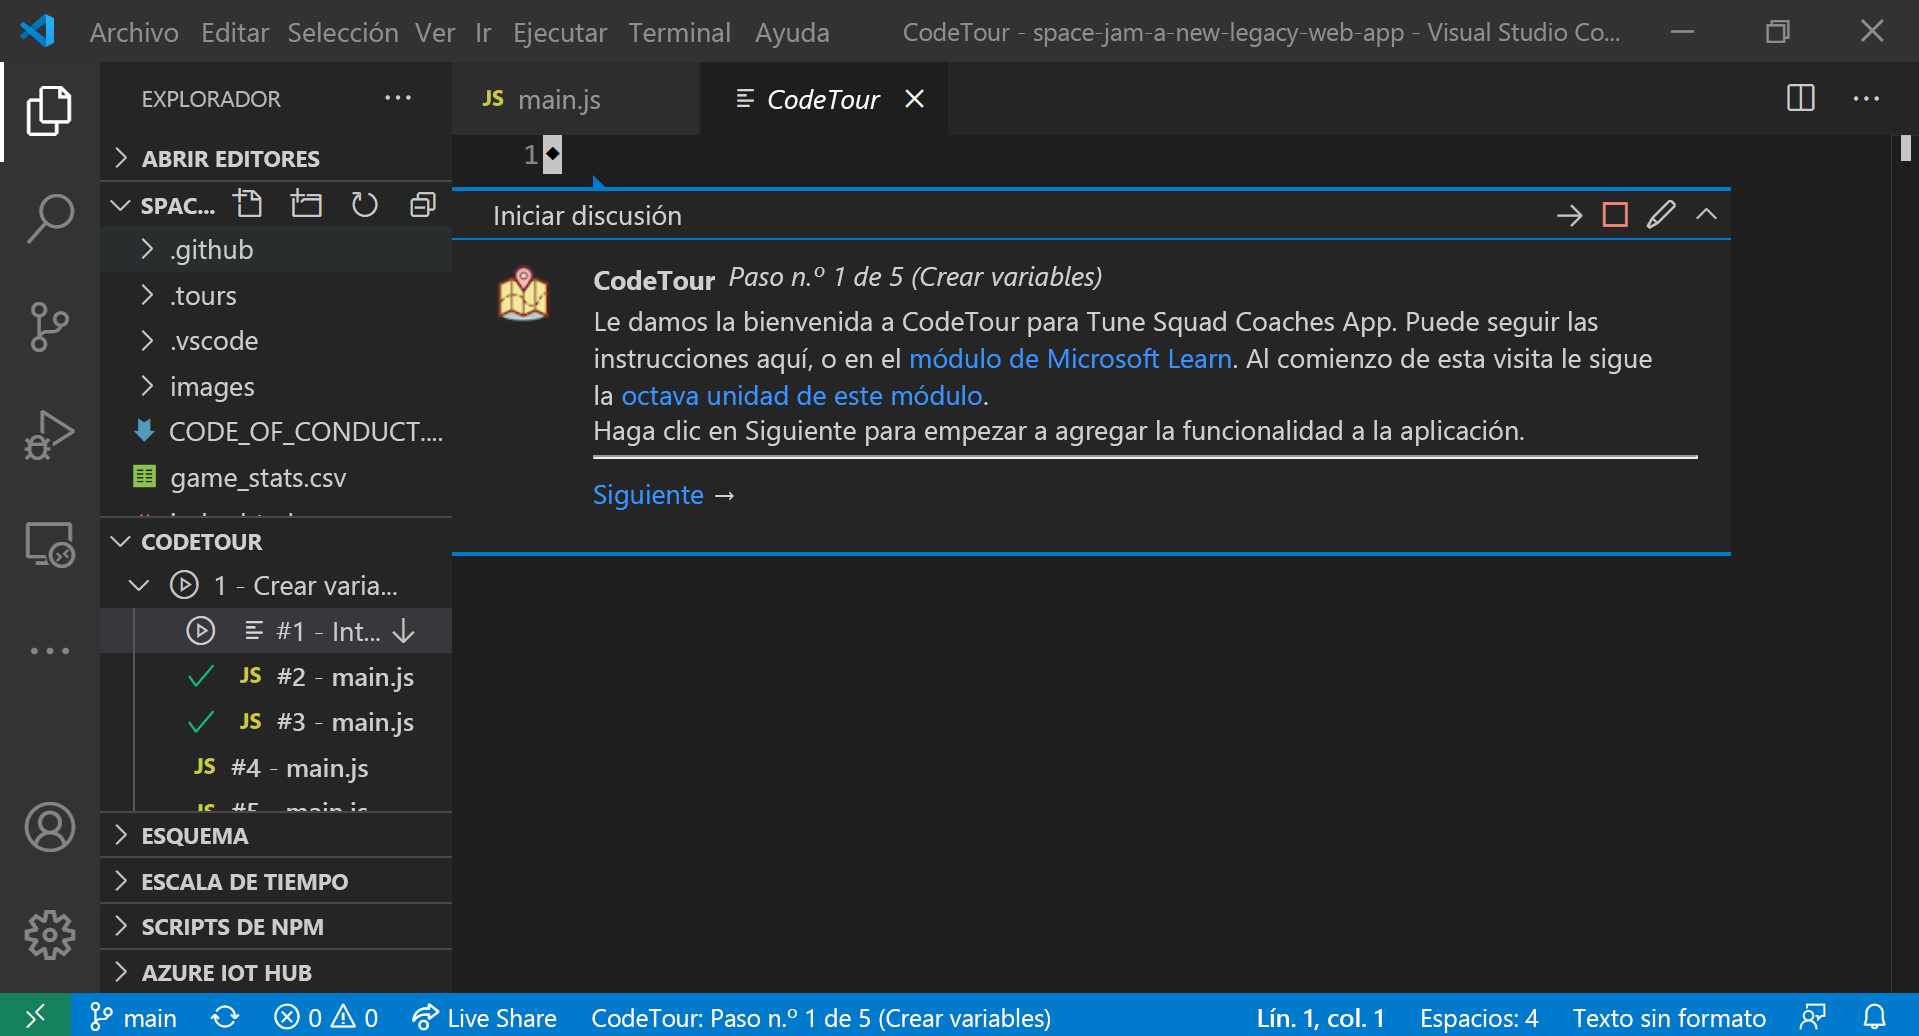 Screenshot that shows the first step in a CodeTour file.